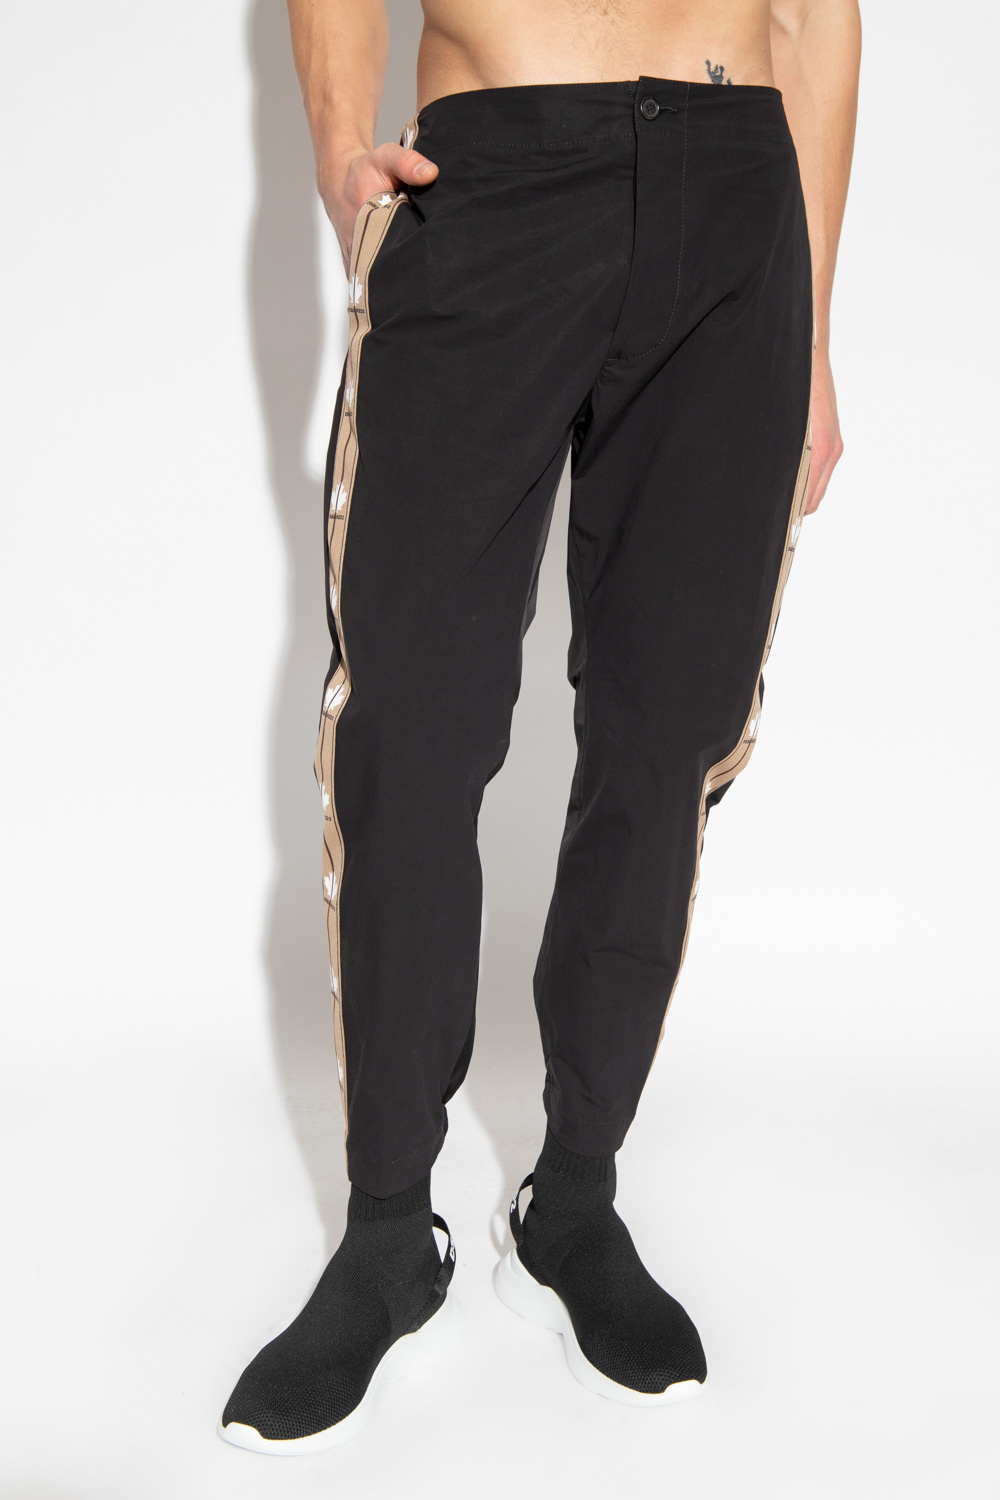 Dsquared2 Side-stripe trousers